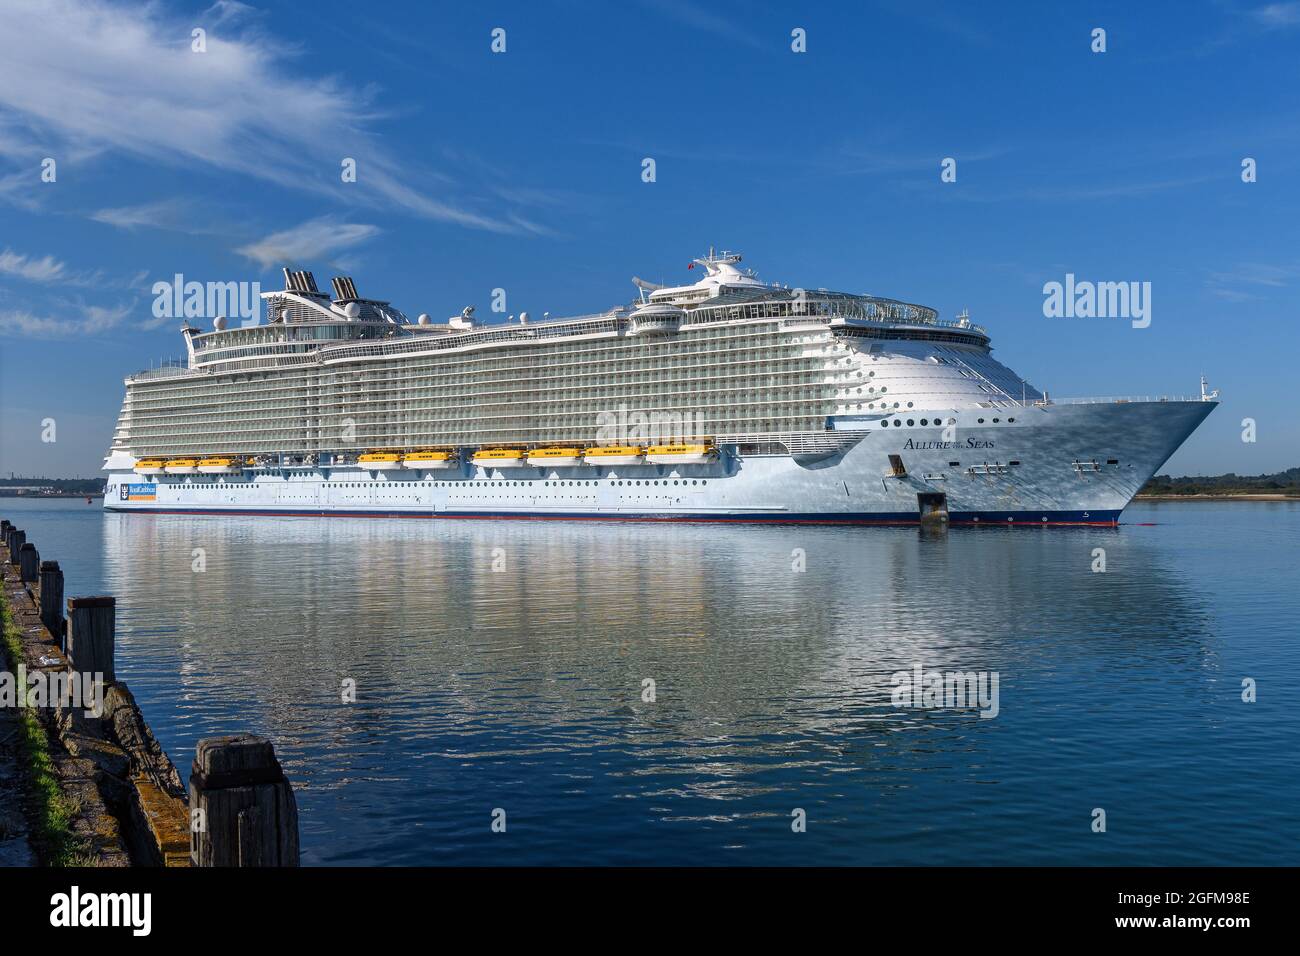 Allure of the Seas, operated by Royal Caribbean International, is one of the world's largest cruise ships - July 2020. Stock Photo